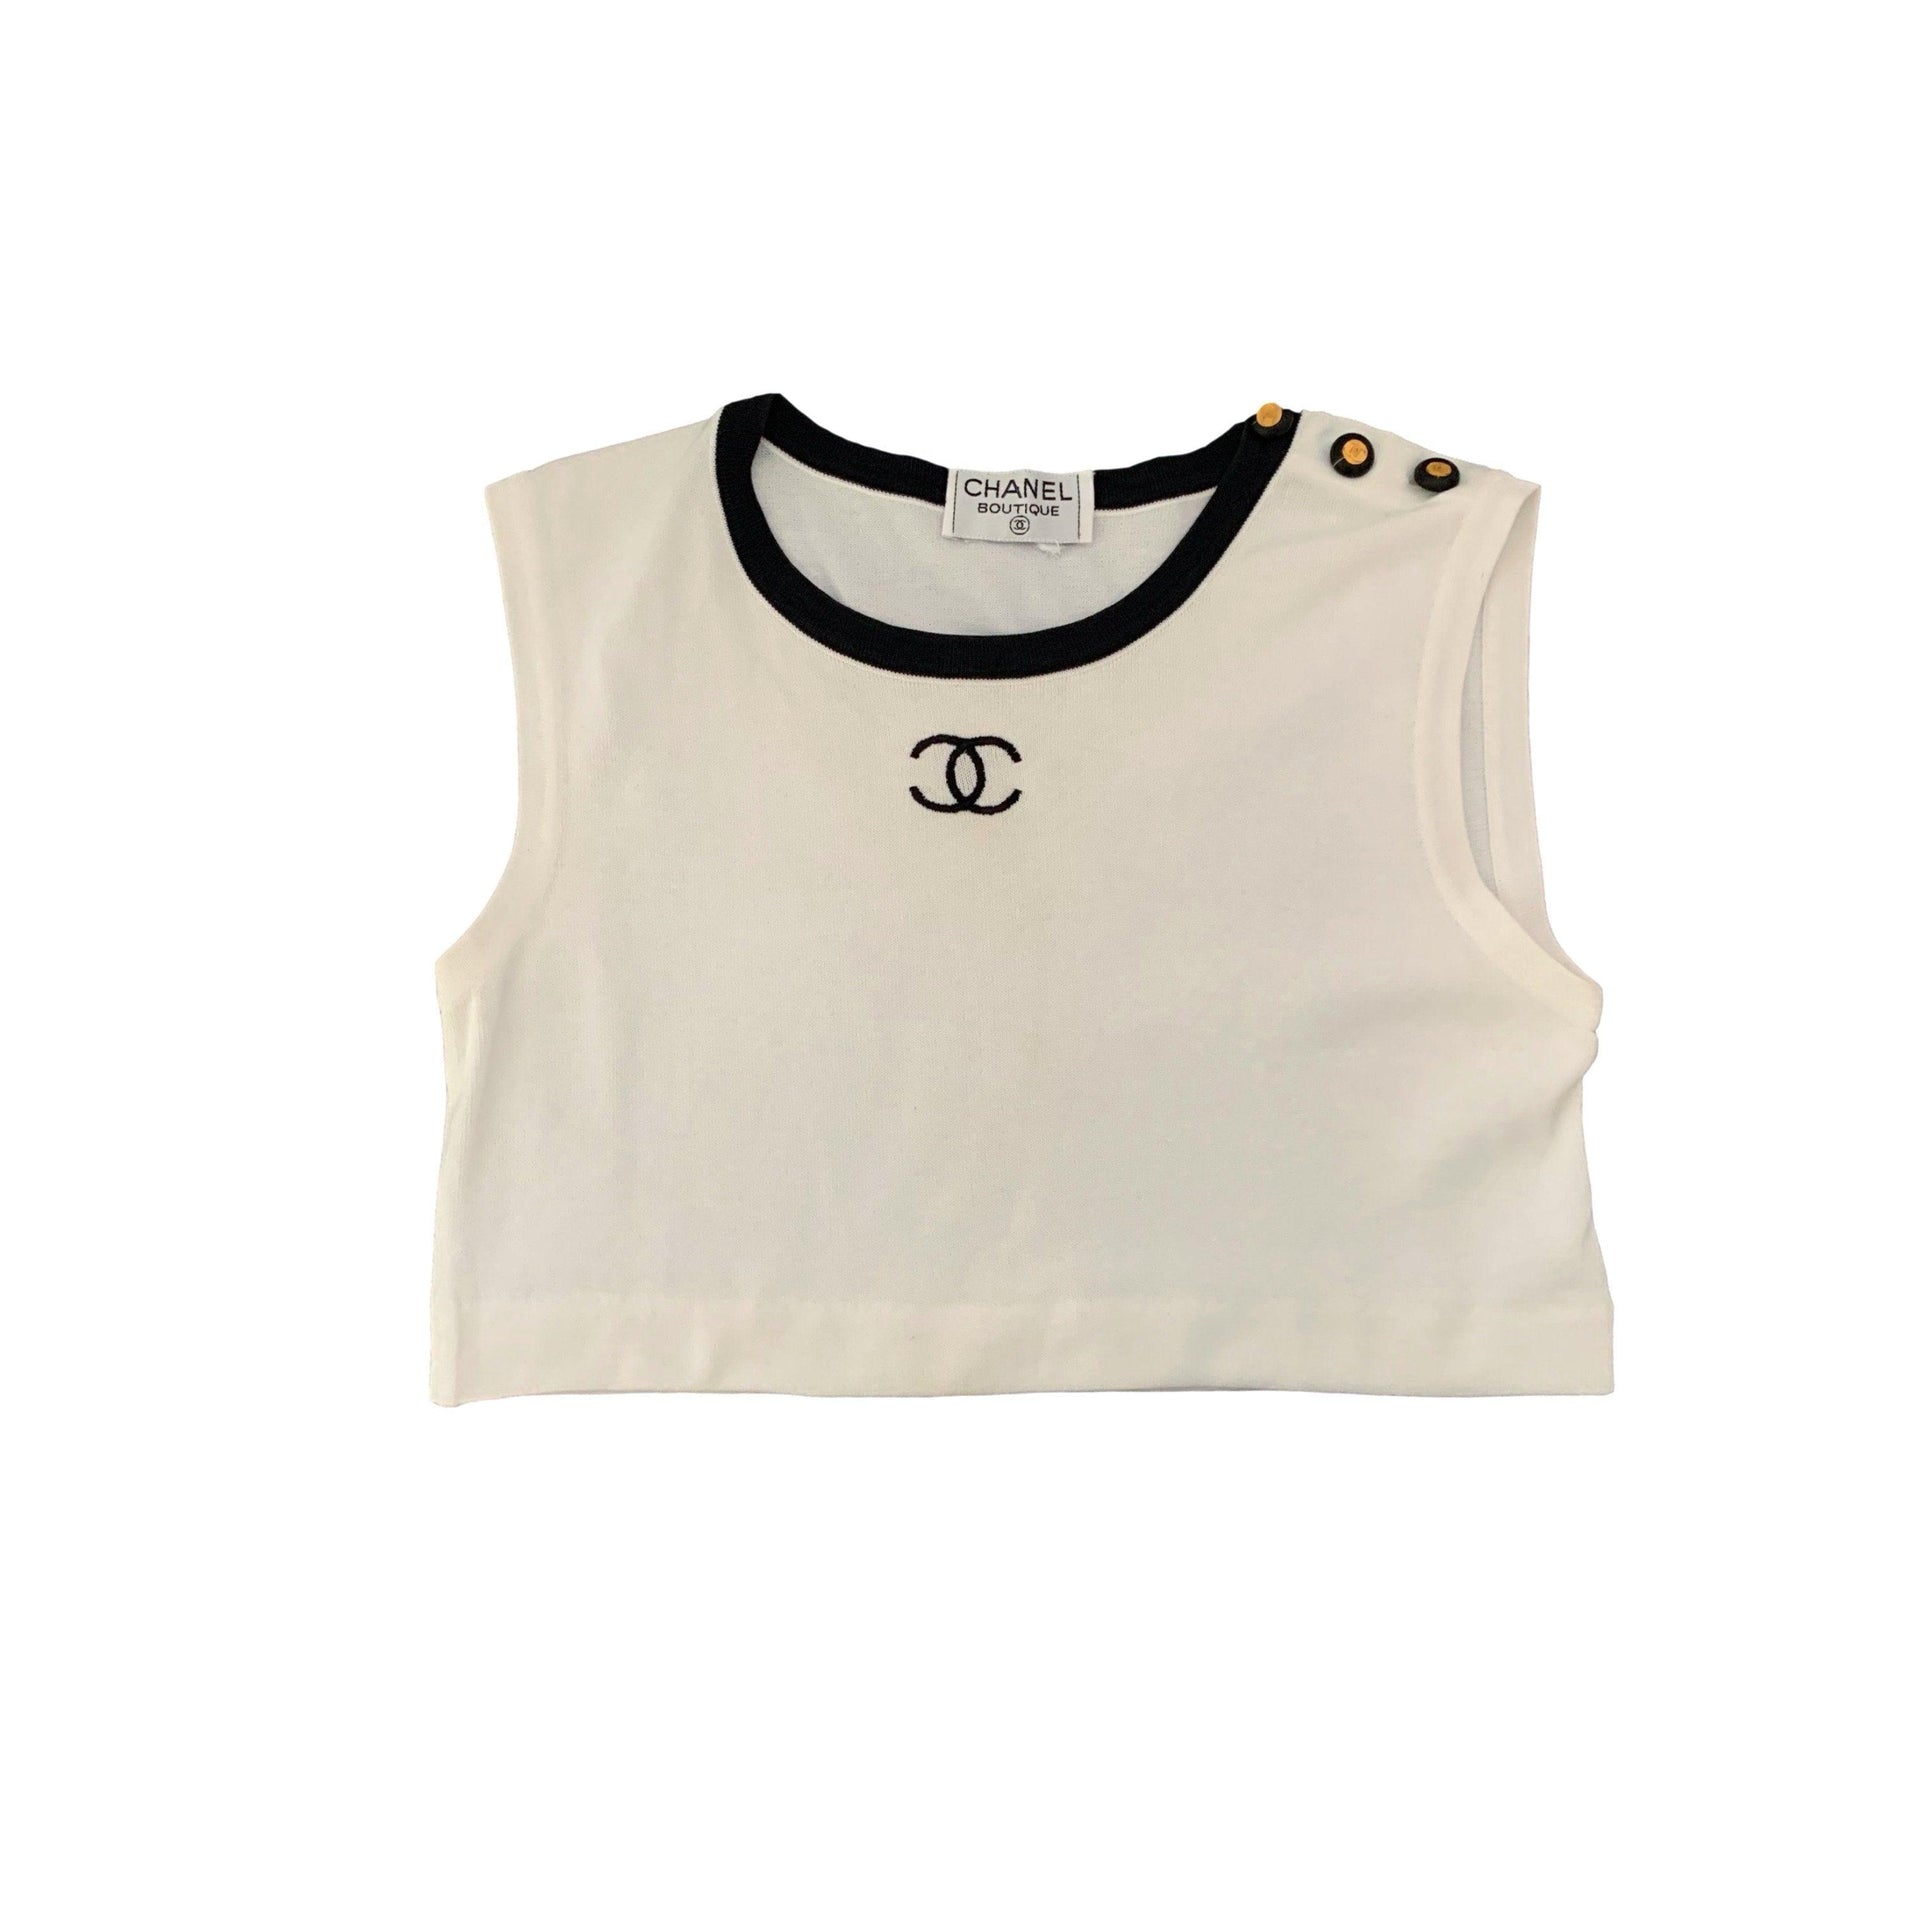 CHANEL, Tops, Chanel 223 Spring Summer Crop Top Size 38 Us 4 New With  Tags